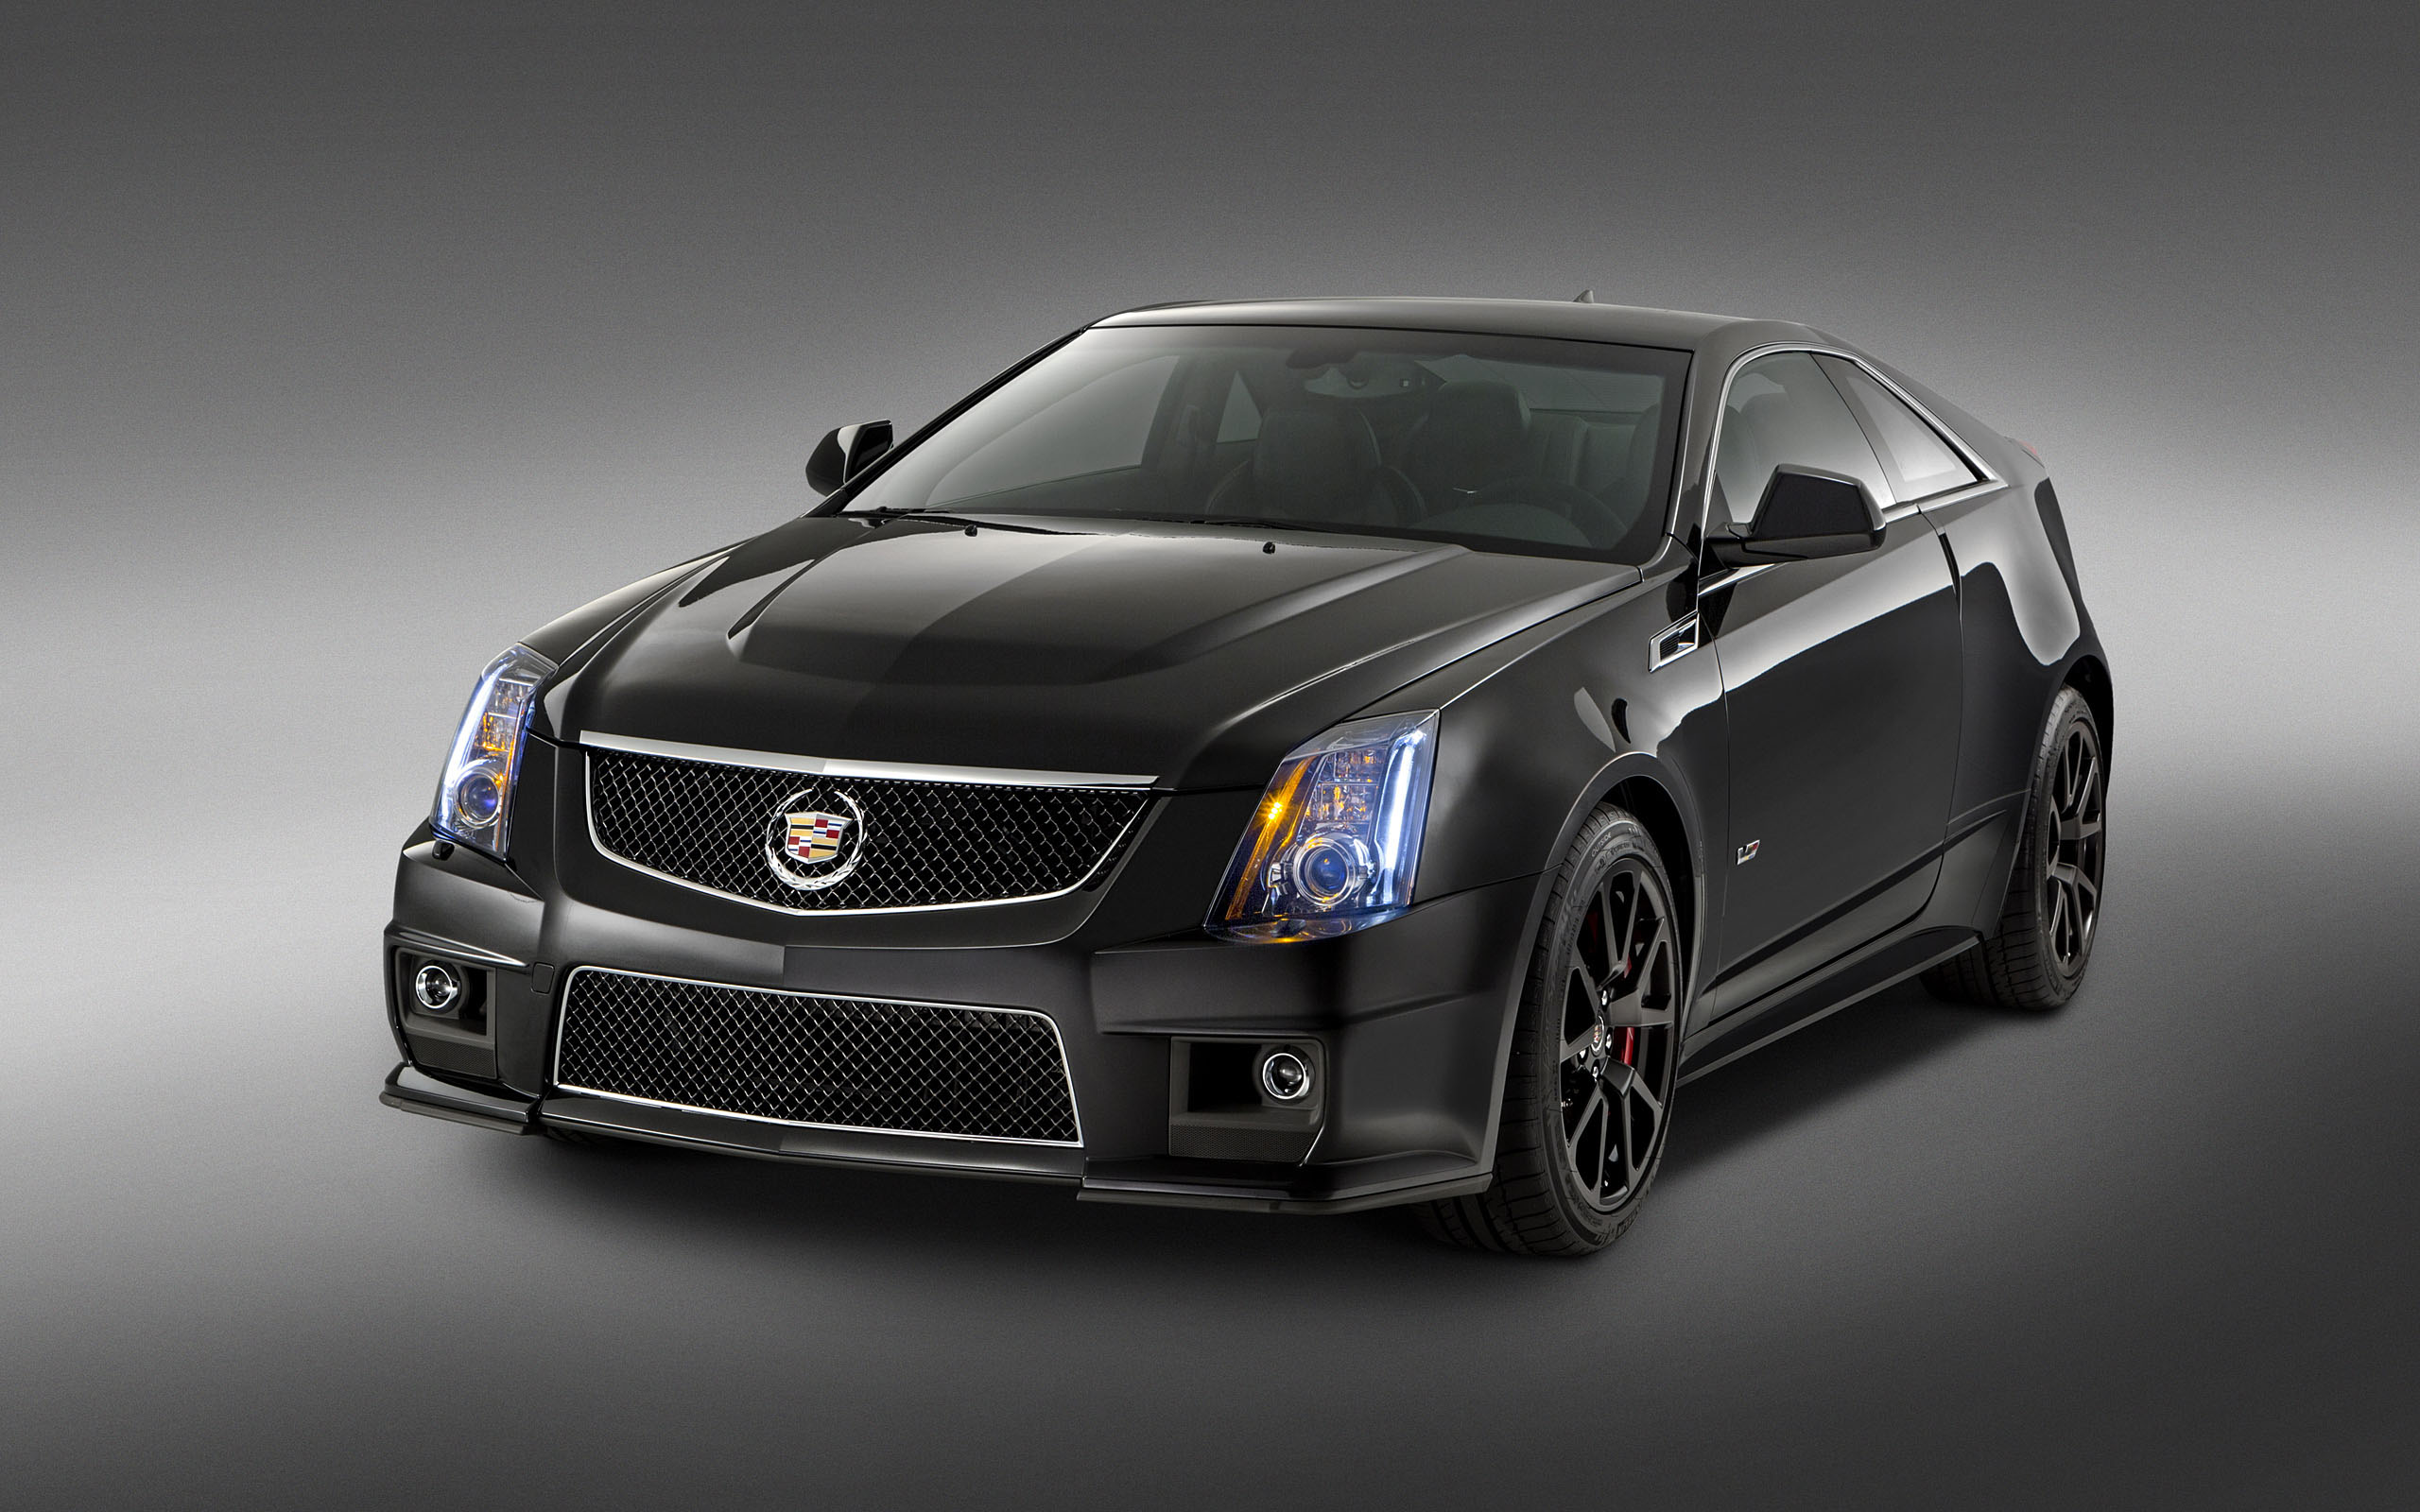  2015 Cadillac CTS-V Coupe Special Edition Wallpaper.